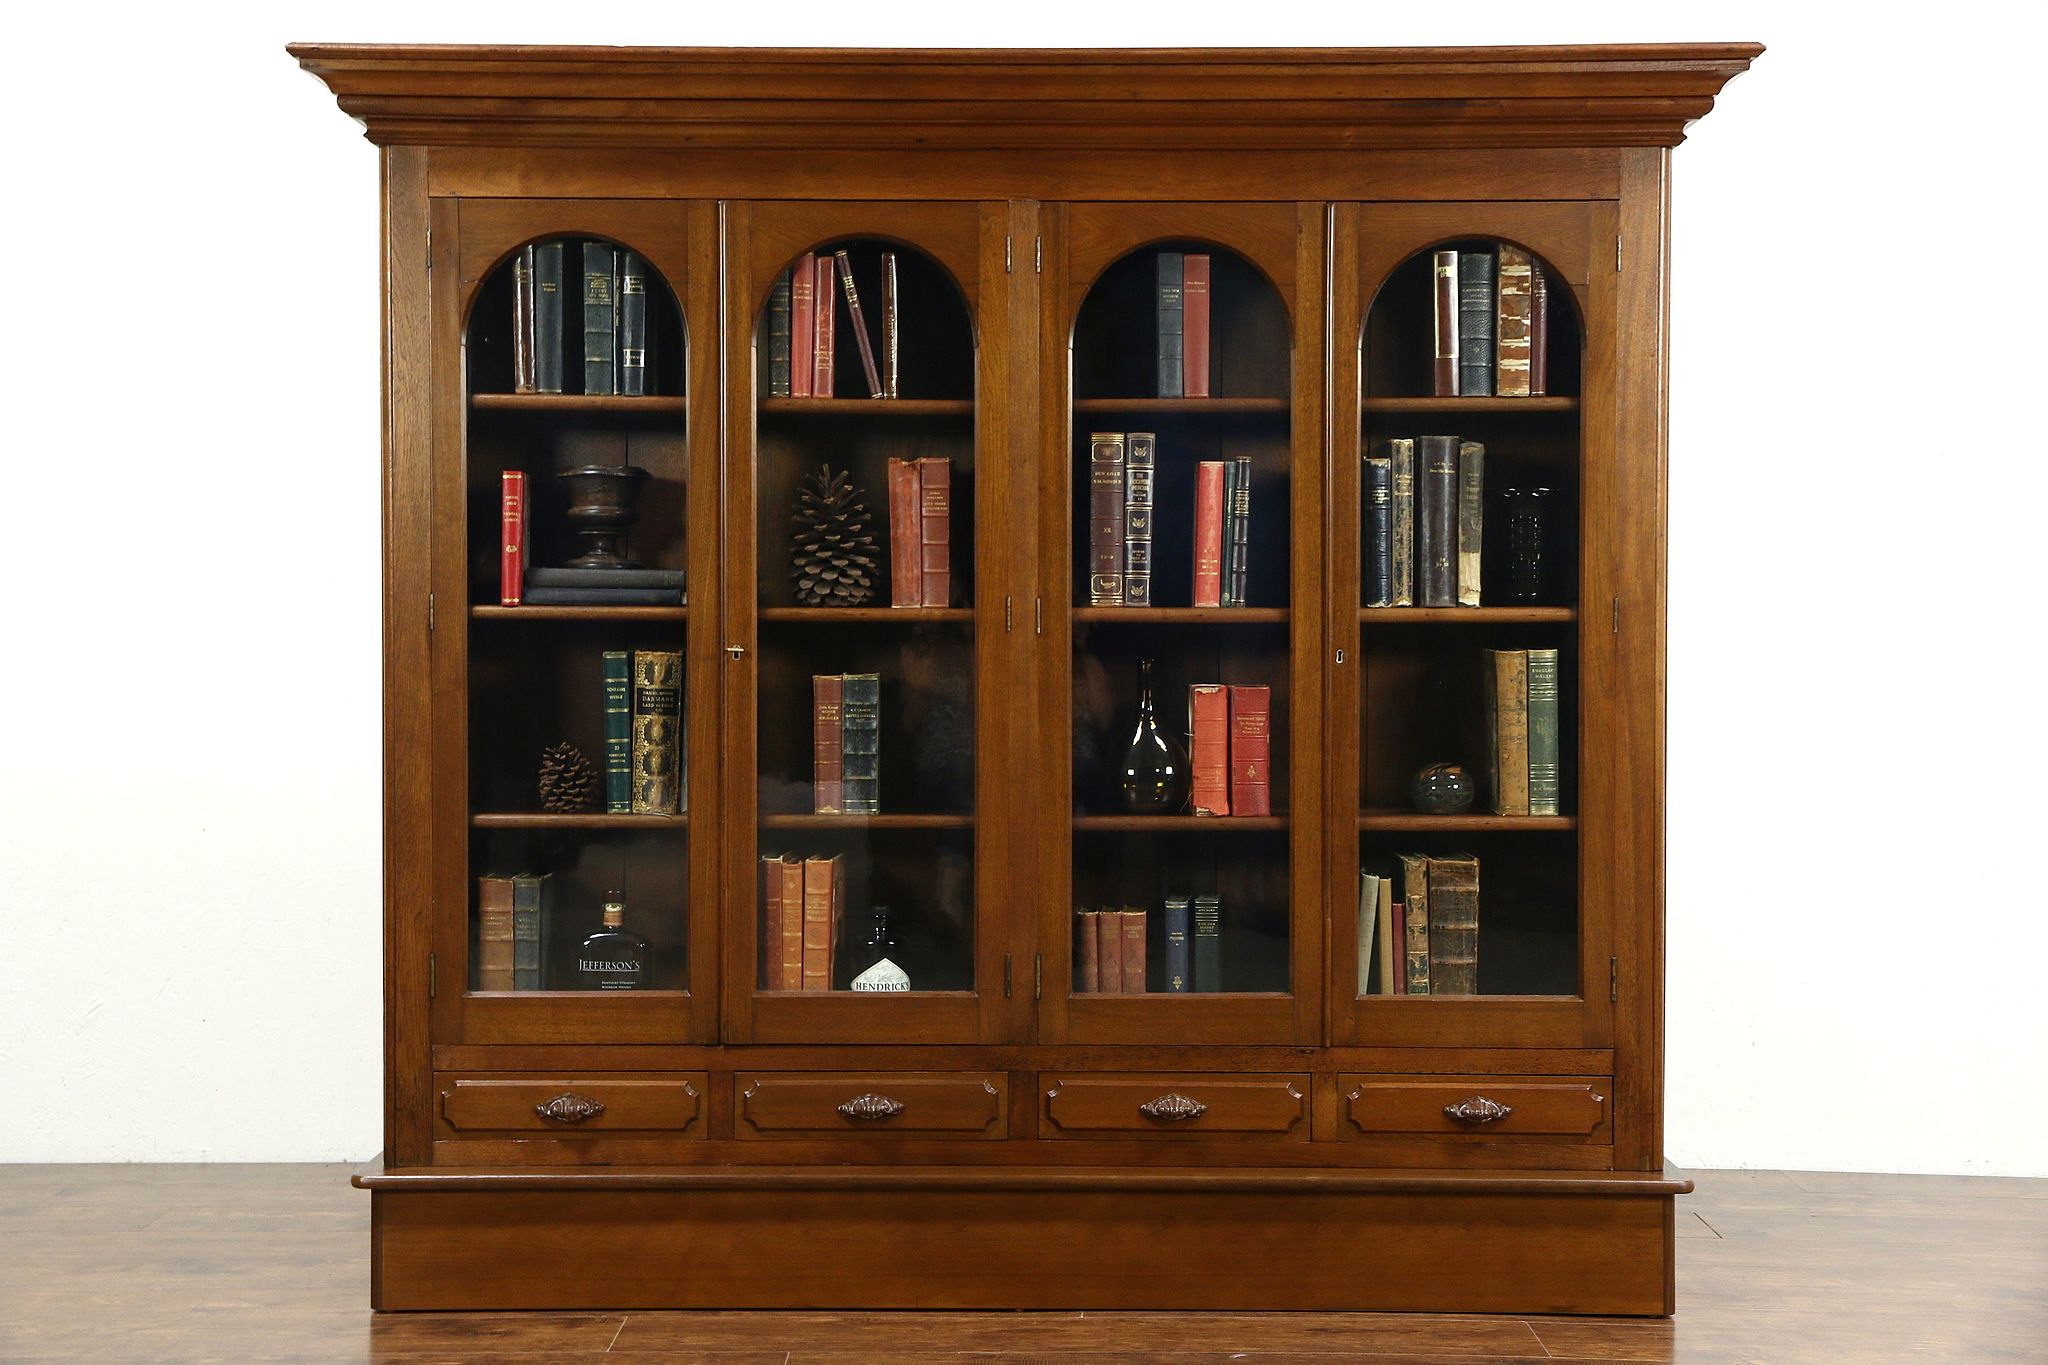 Sold Victorian 1860 Antique Walnut Bookcase 4 Wavy Glass Arched